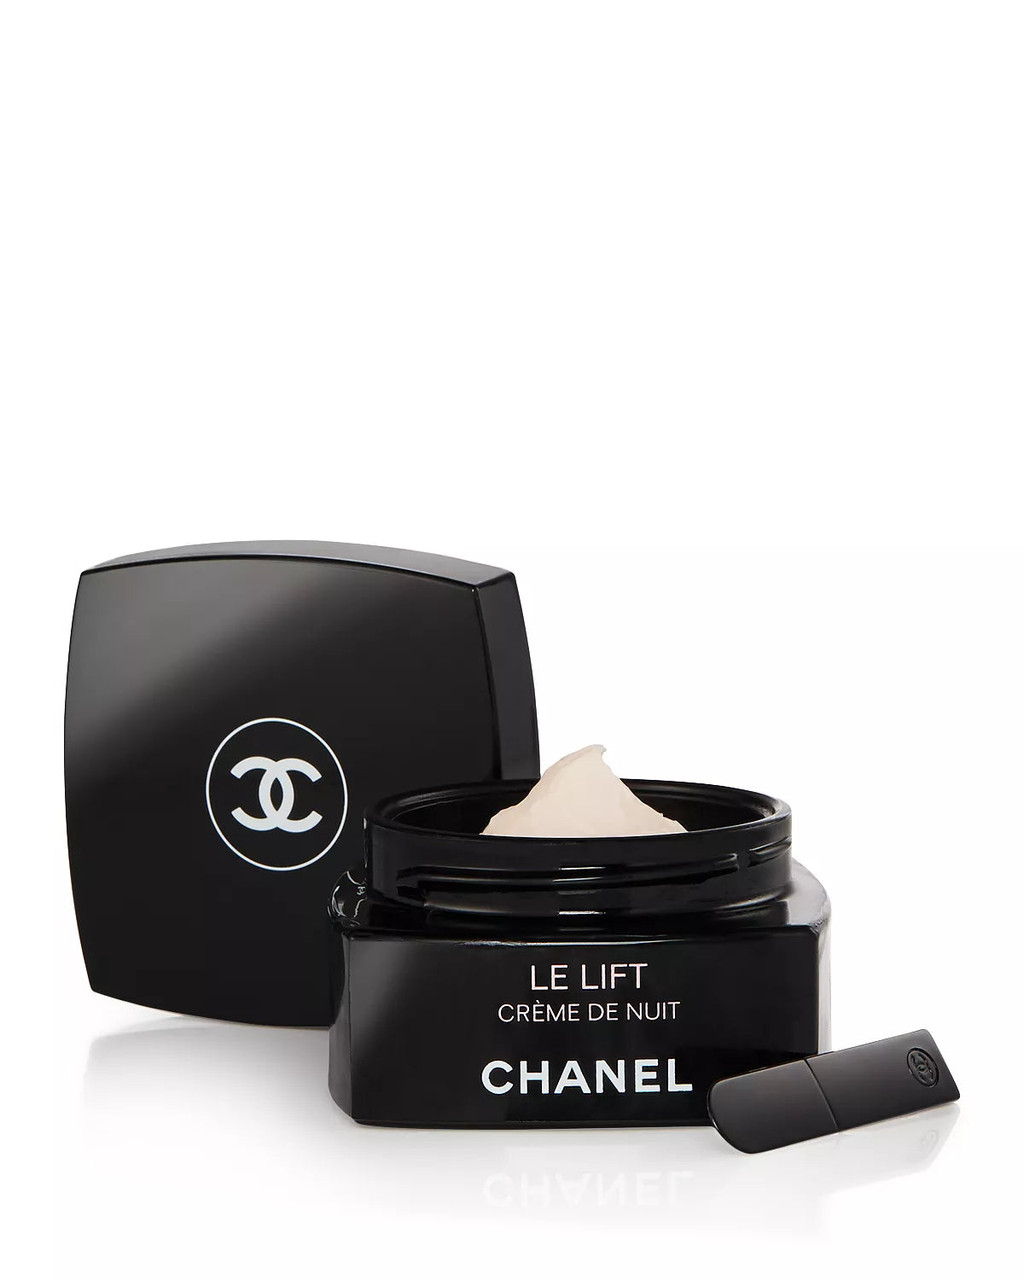 Chanel Le and Night oz 50 1.7 Nuit Creme Lift De - Smoothing Cream g Firming